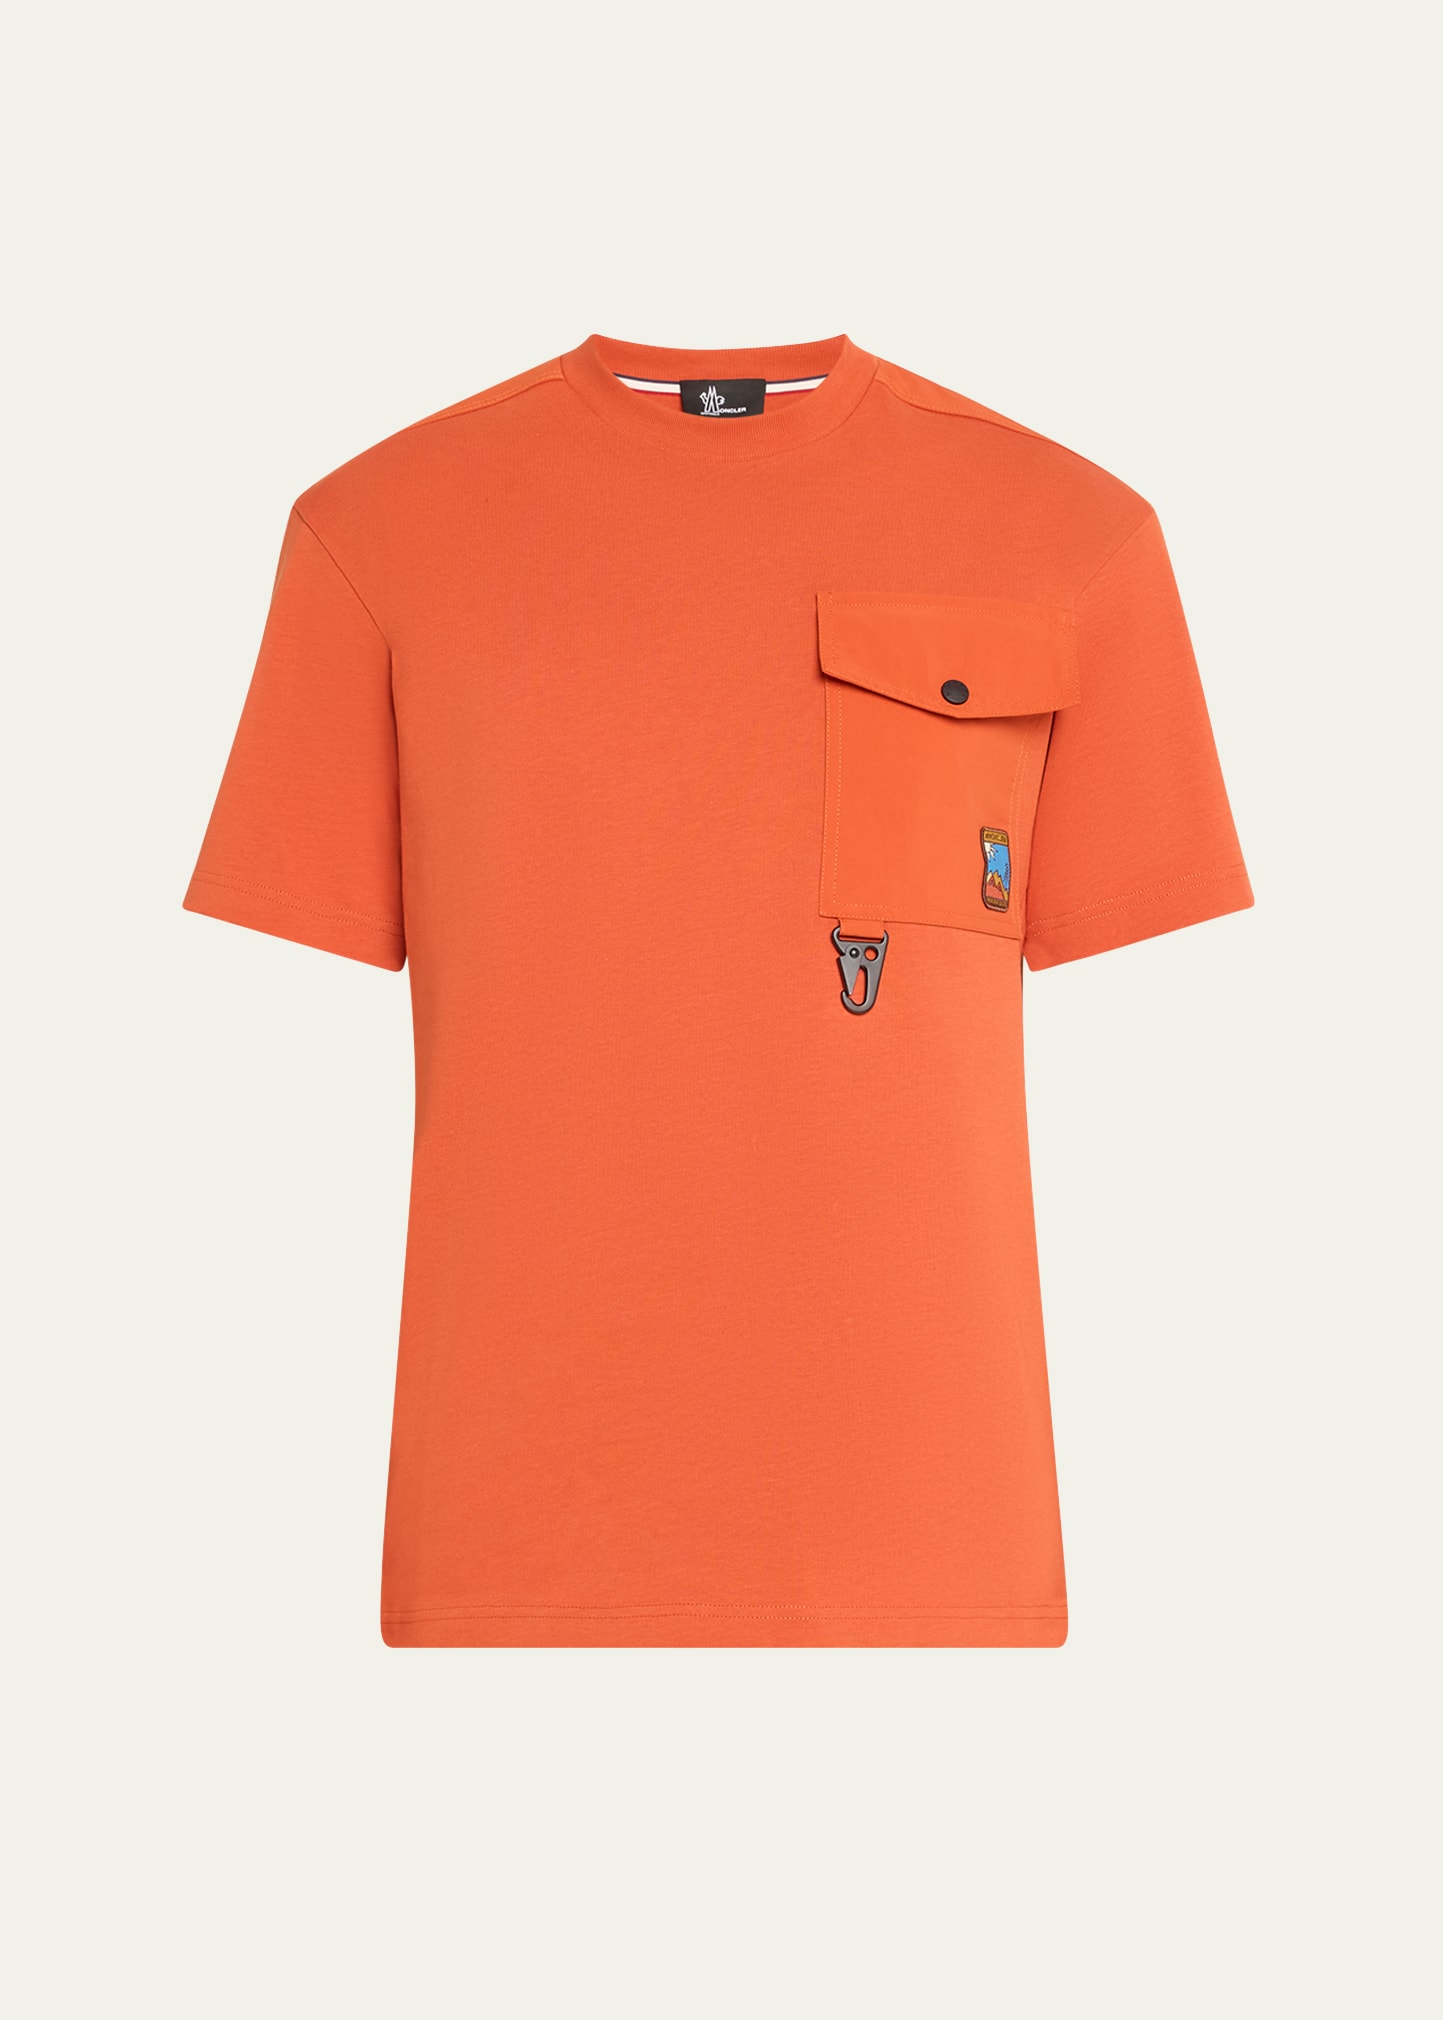 Men's Jersey T-Shirt with Utility Pocket